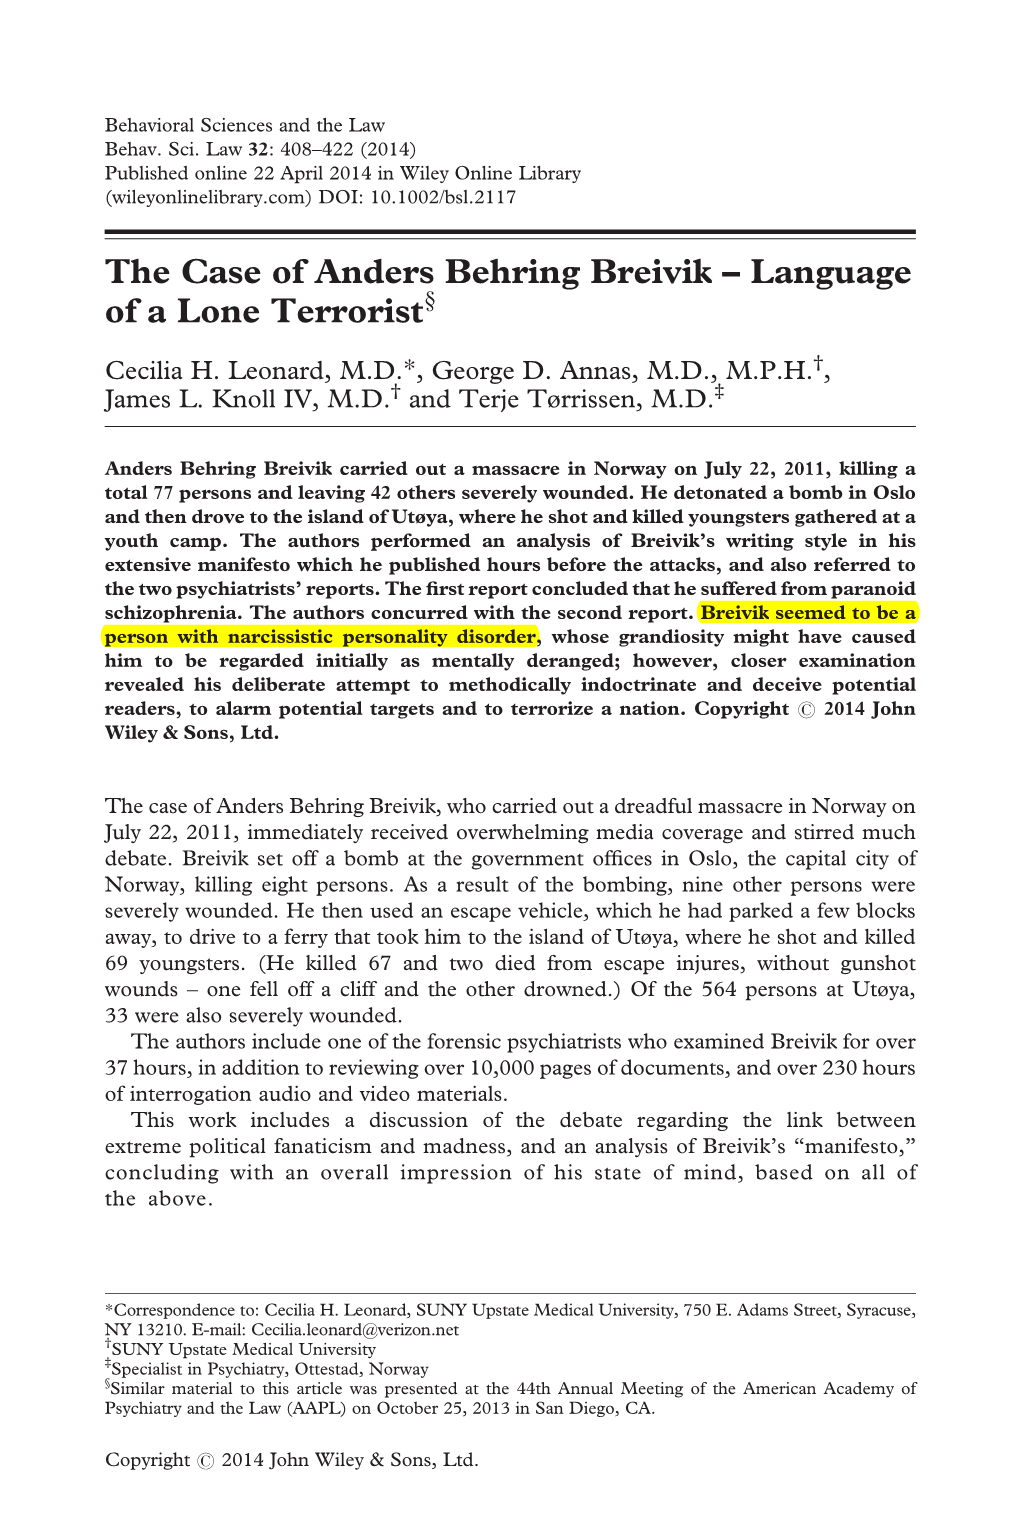 The Case of Anders Behring Breivik Language of a Lone Terrorist